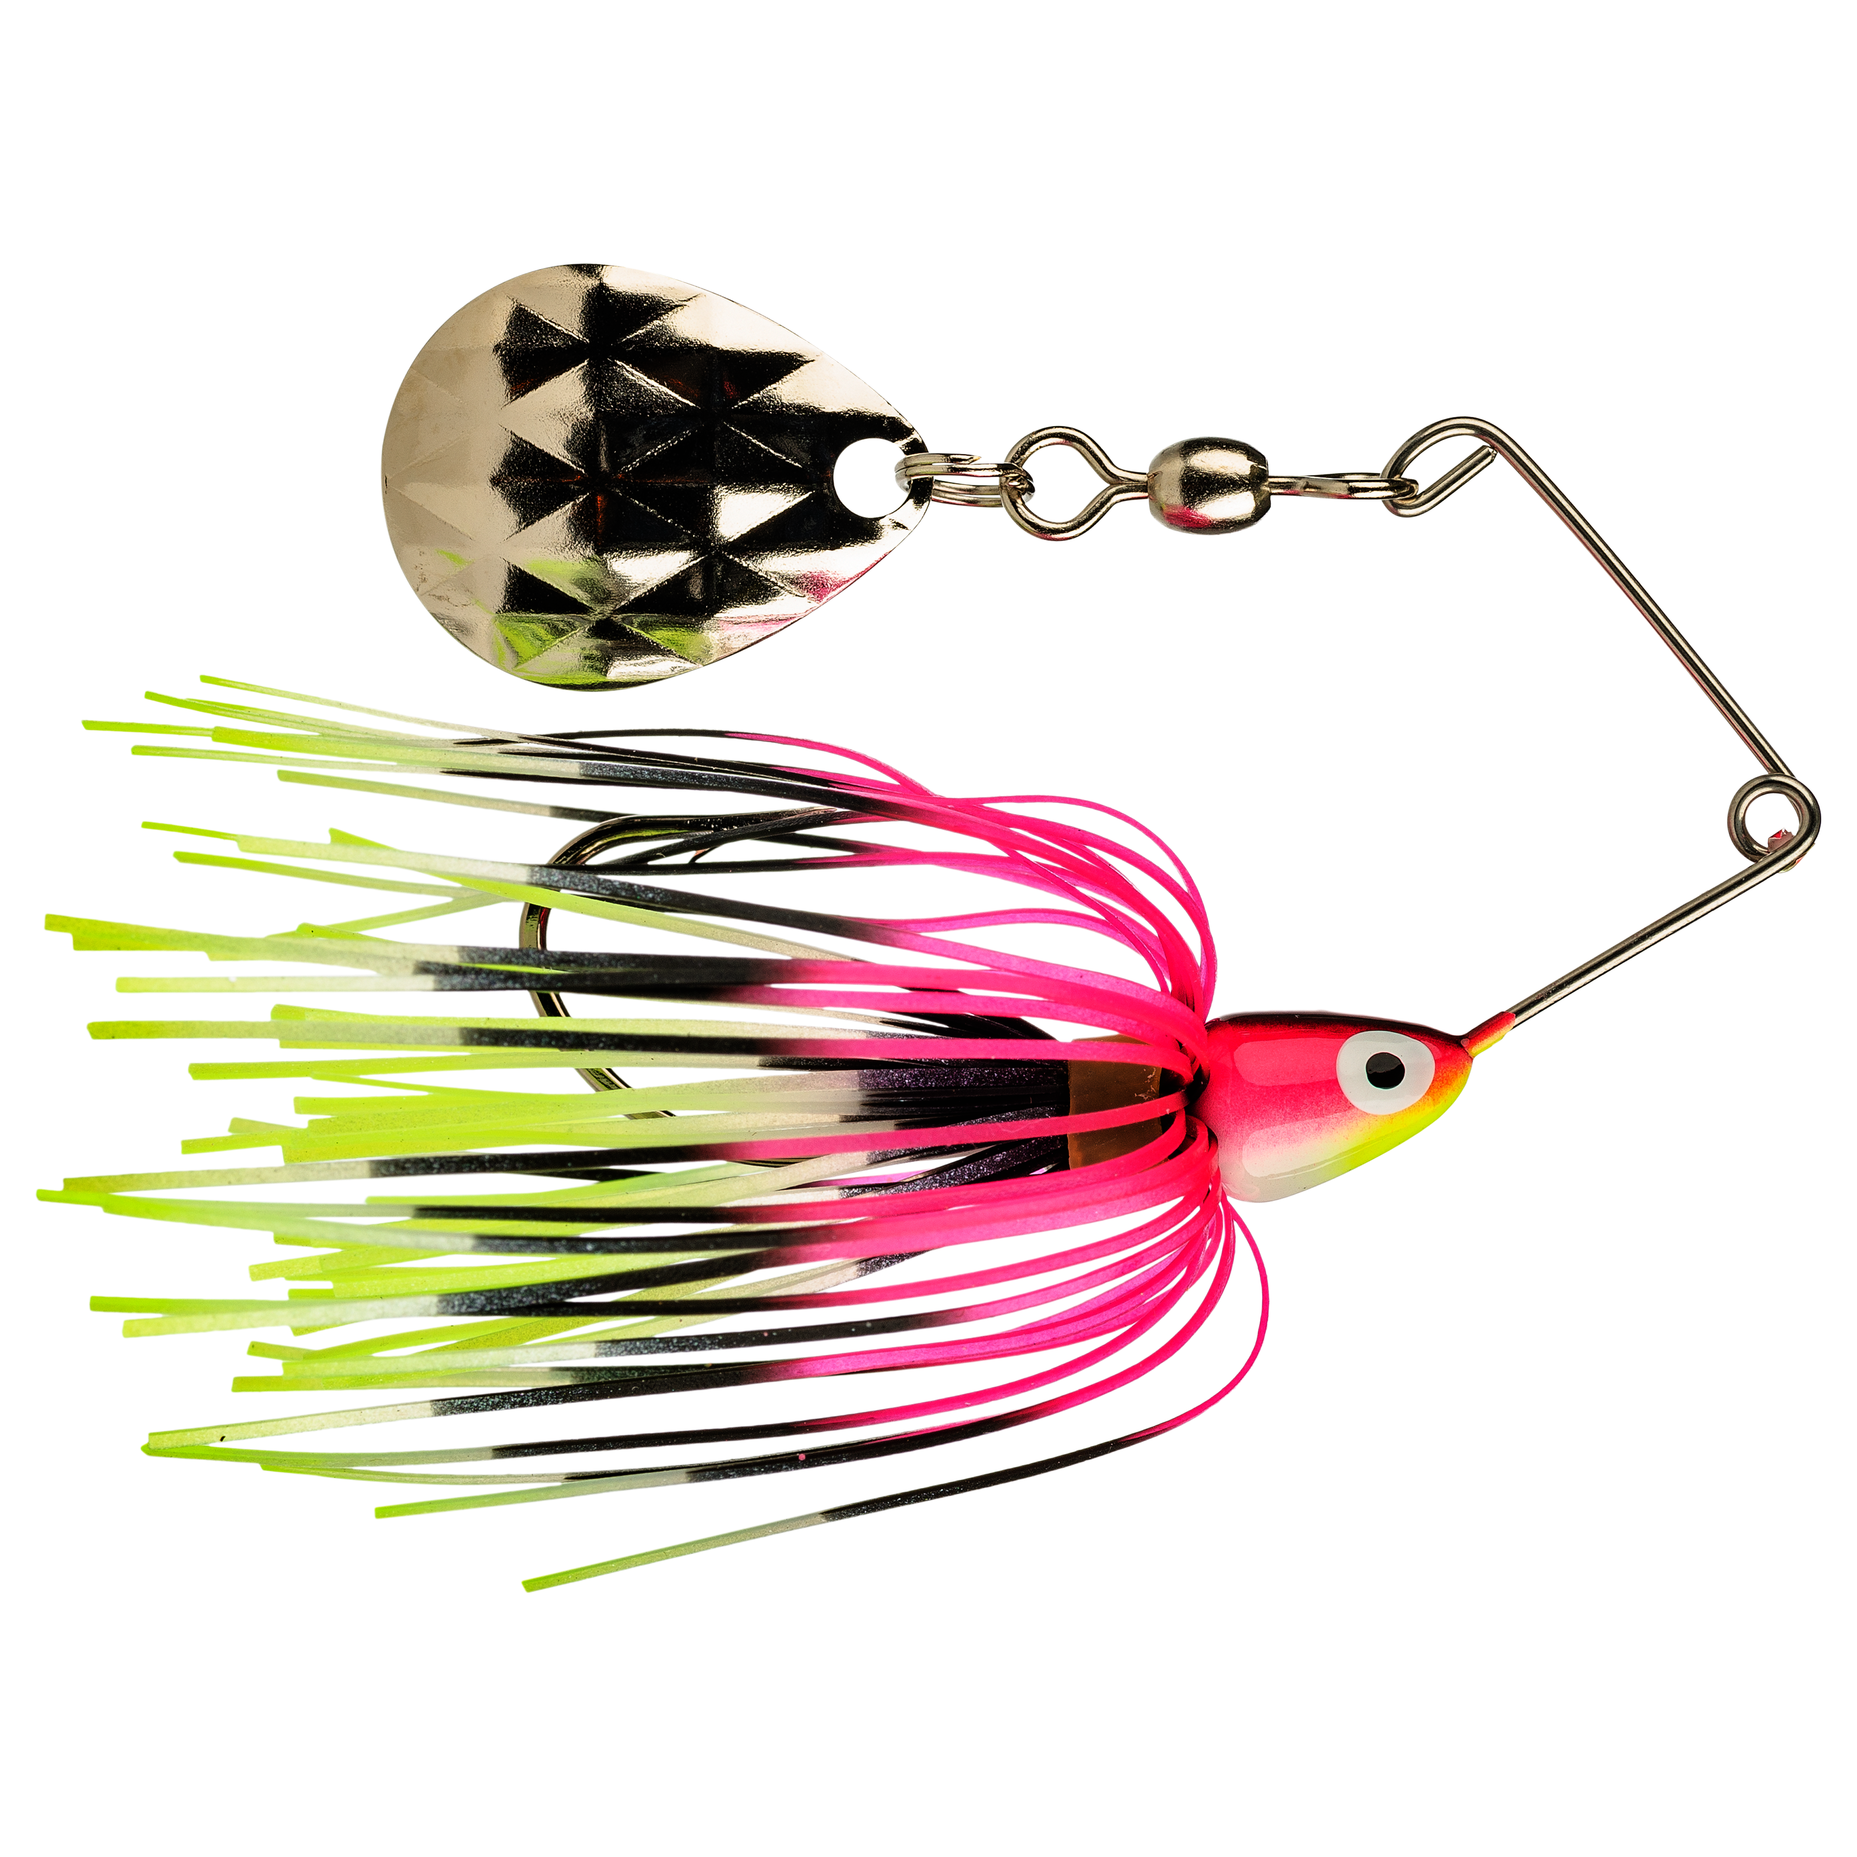 Strike King Red Eyed Mini-King 1/8oz Spinnerbait (Select Color